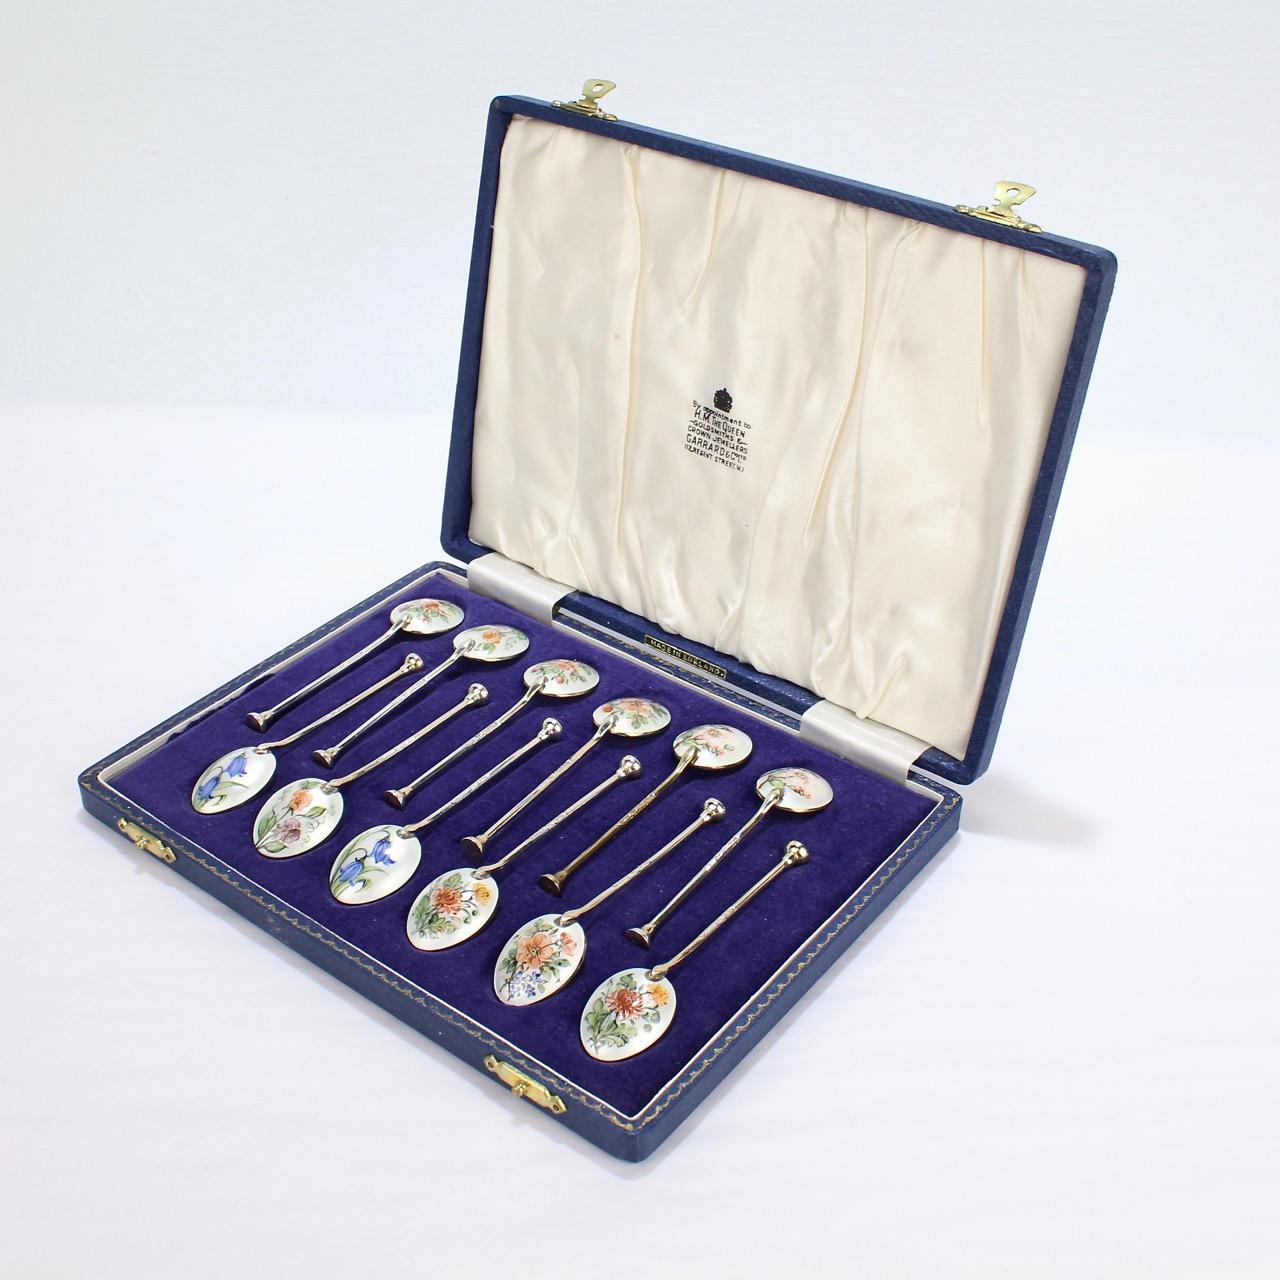 A fine complete boxed set of 12 botanical enameled silver demitasse spoons.

The reverse of each enameled and decorated with various flower species.

Each marked England and hallmarked for Baker Ellis Silver Co., Birmingham, Sterling, and